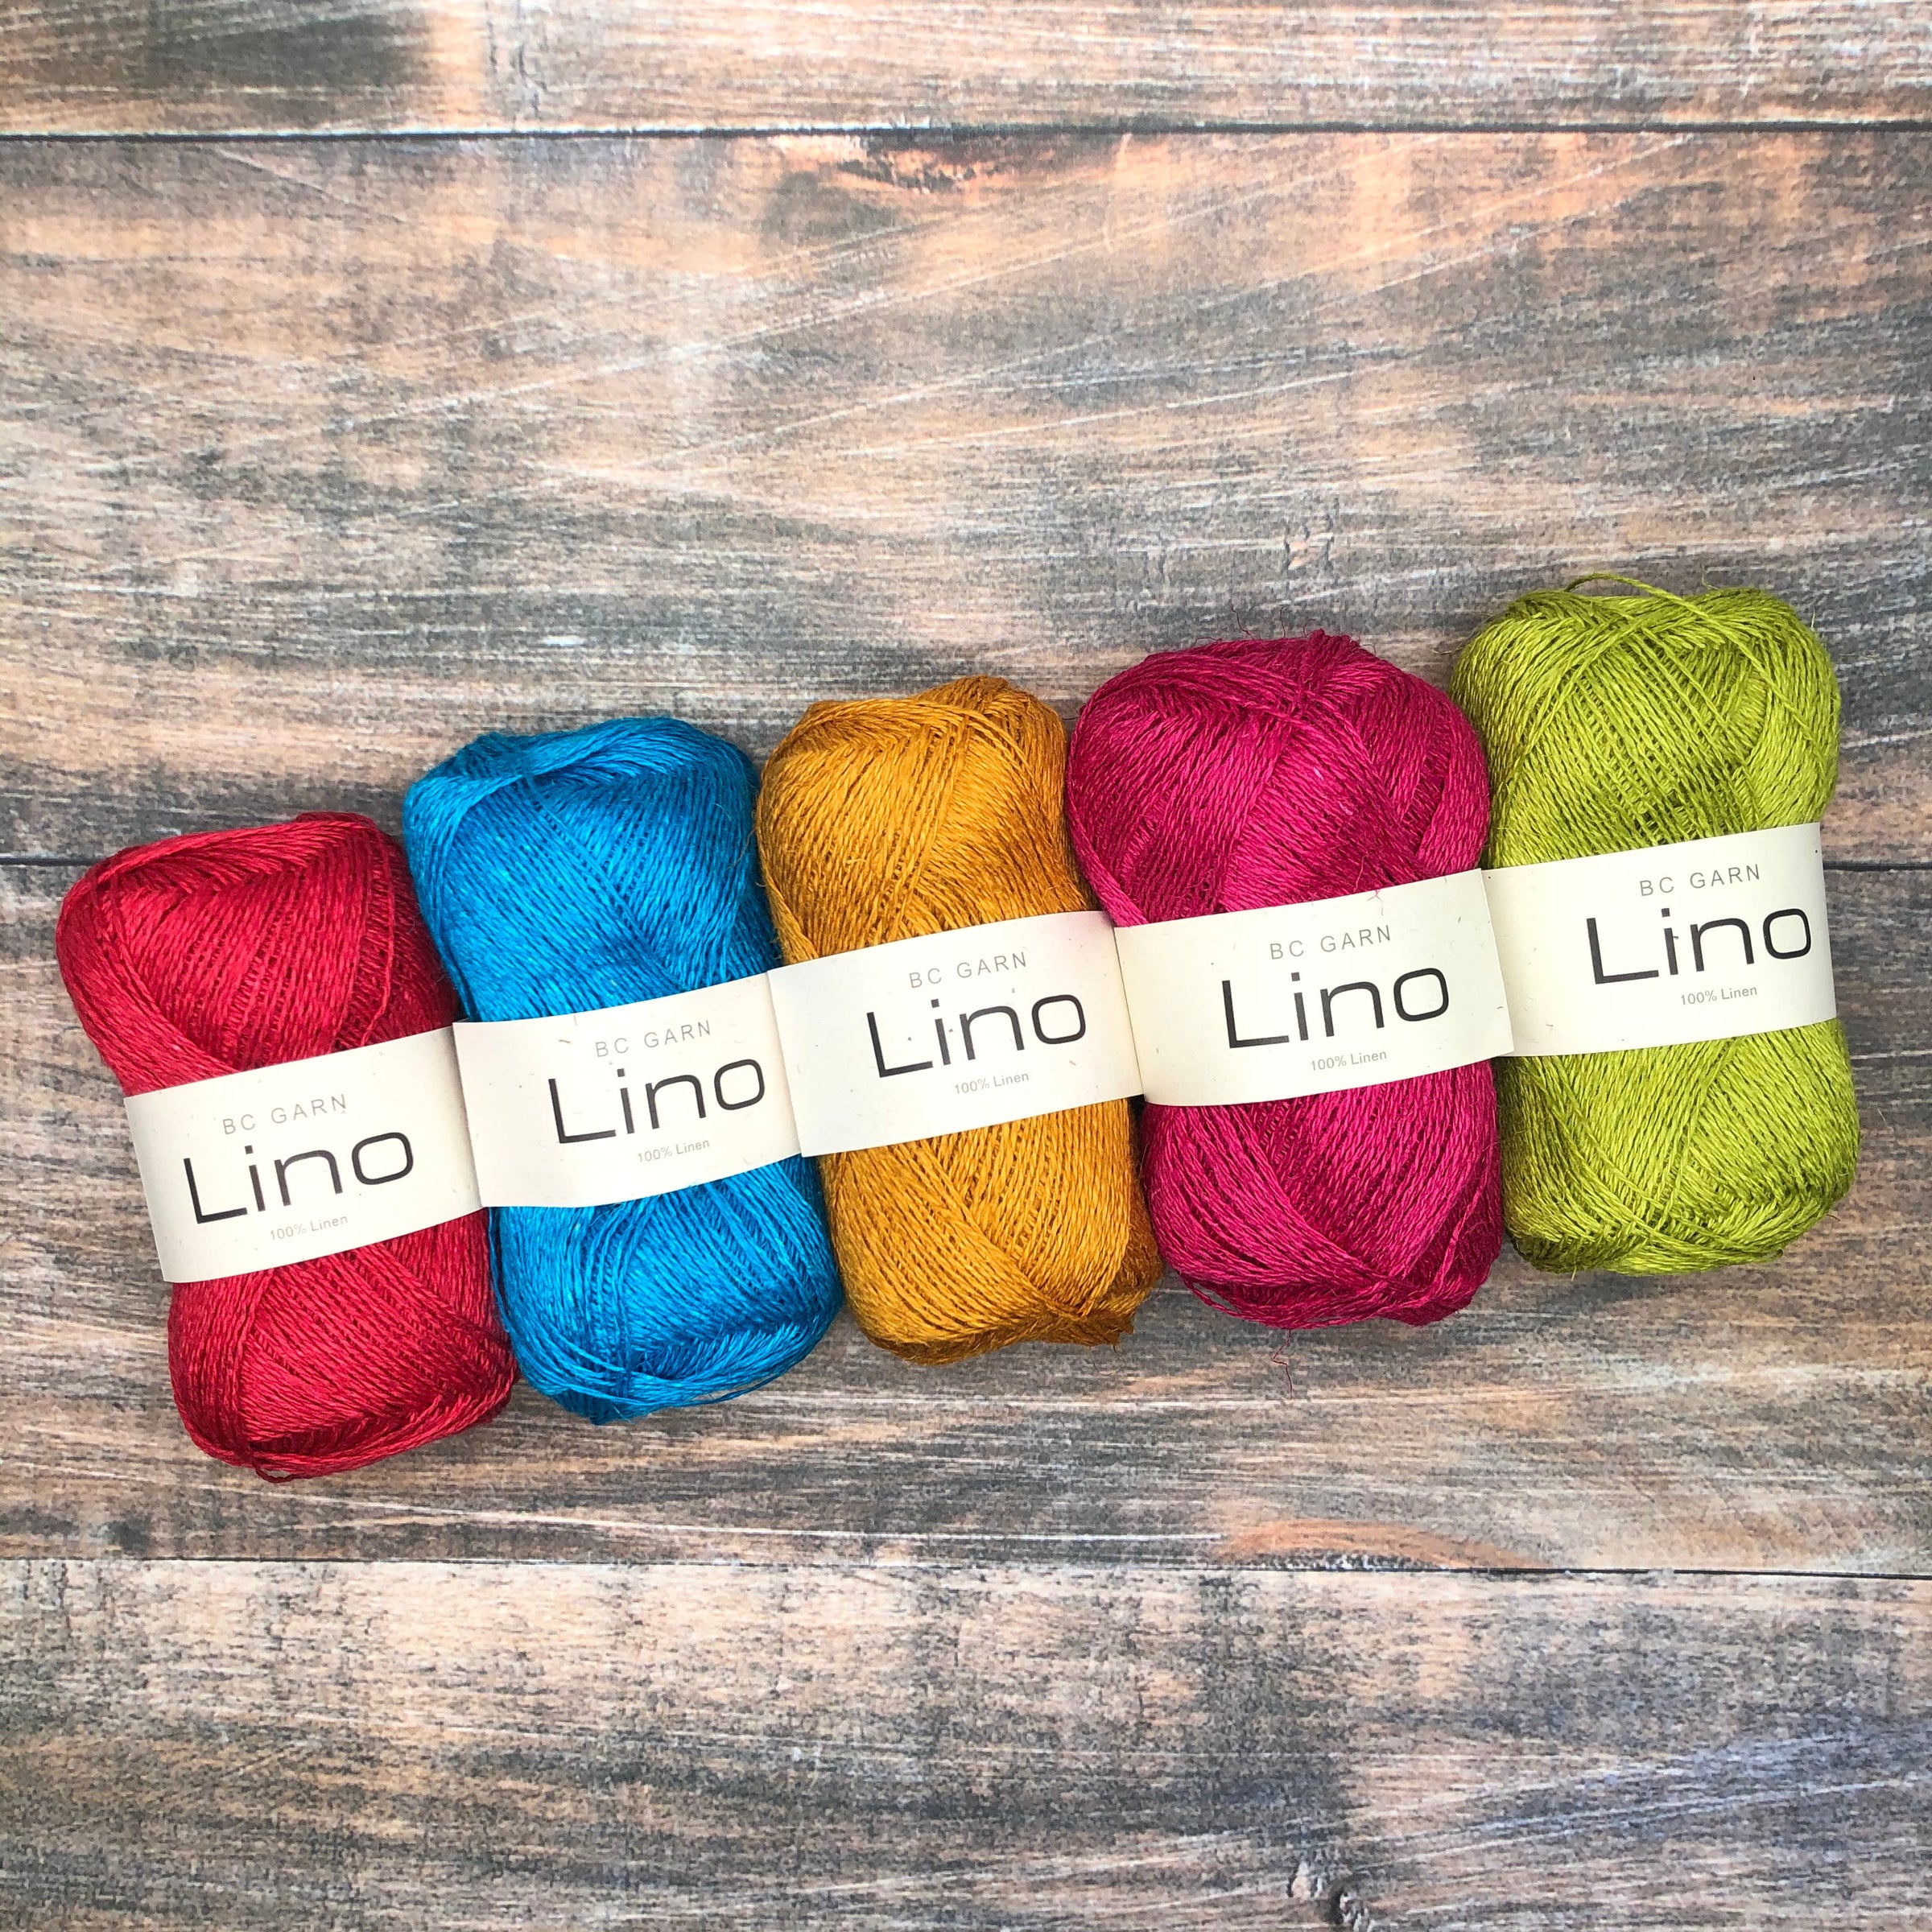 Lino by BC | JanKnit's